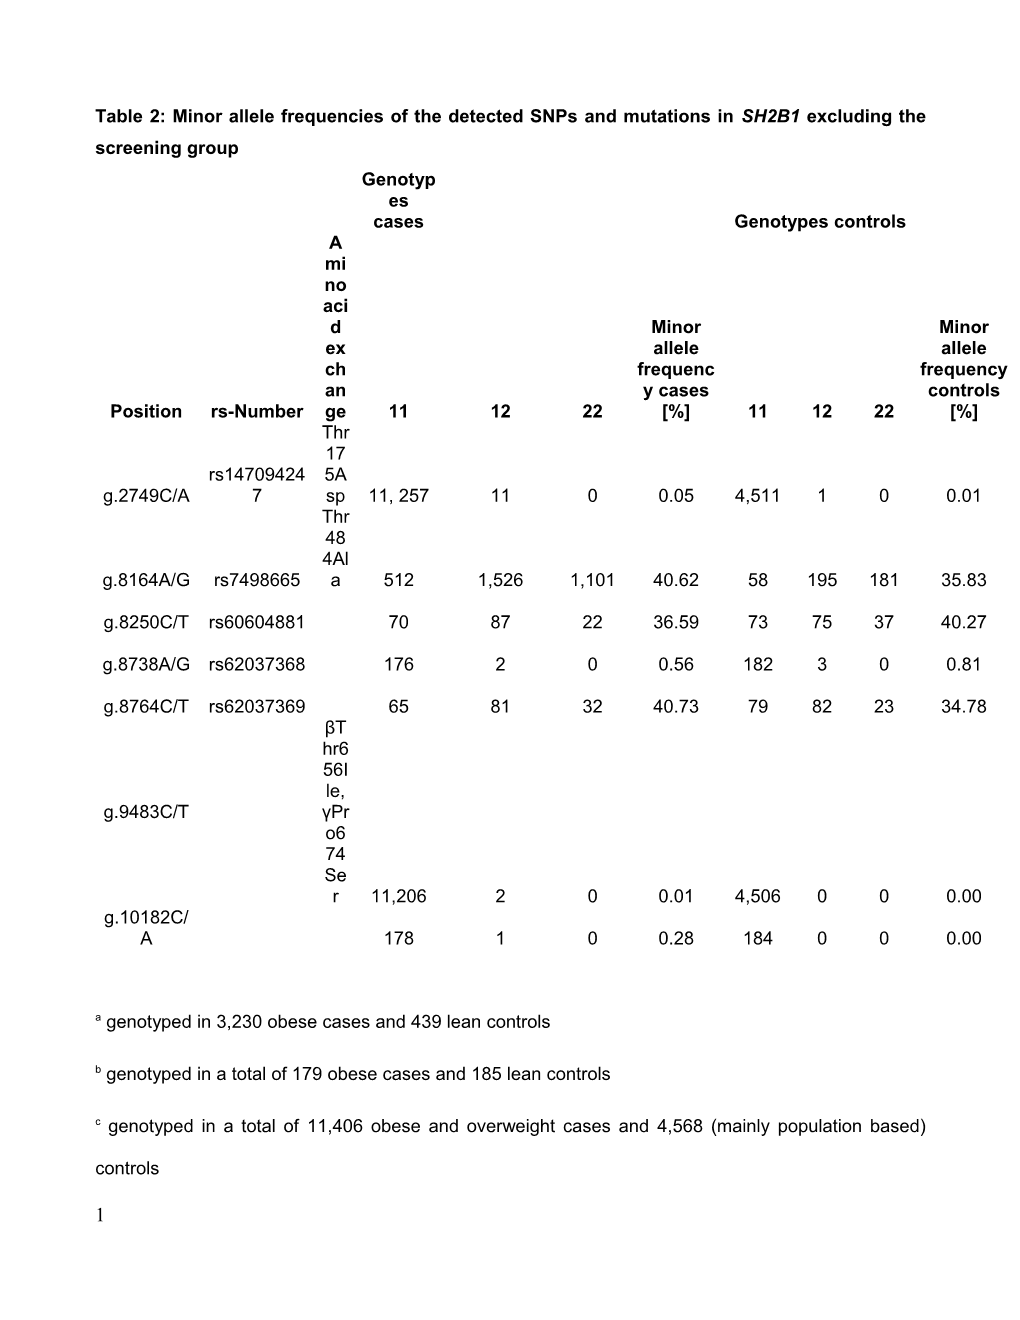 Table 2: Minor Allele Frequencies of the Detected Snps and Mutations in SH2B1 Excluding